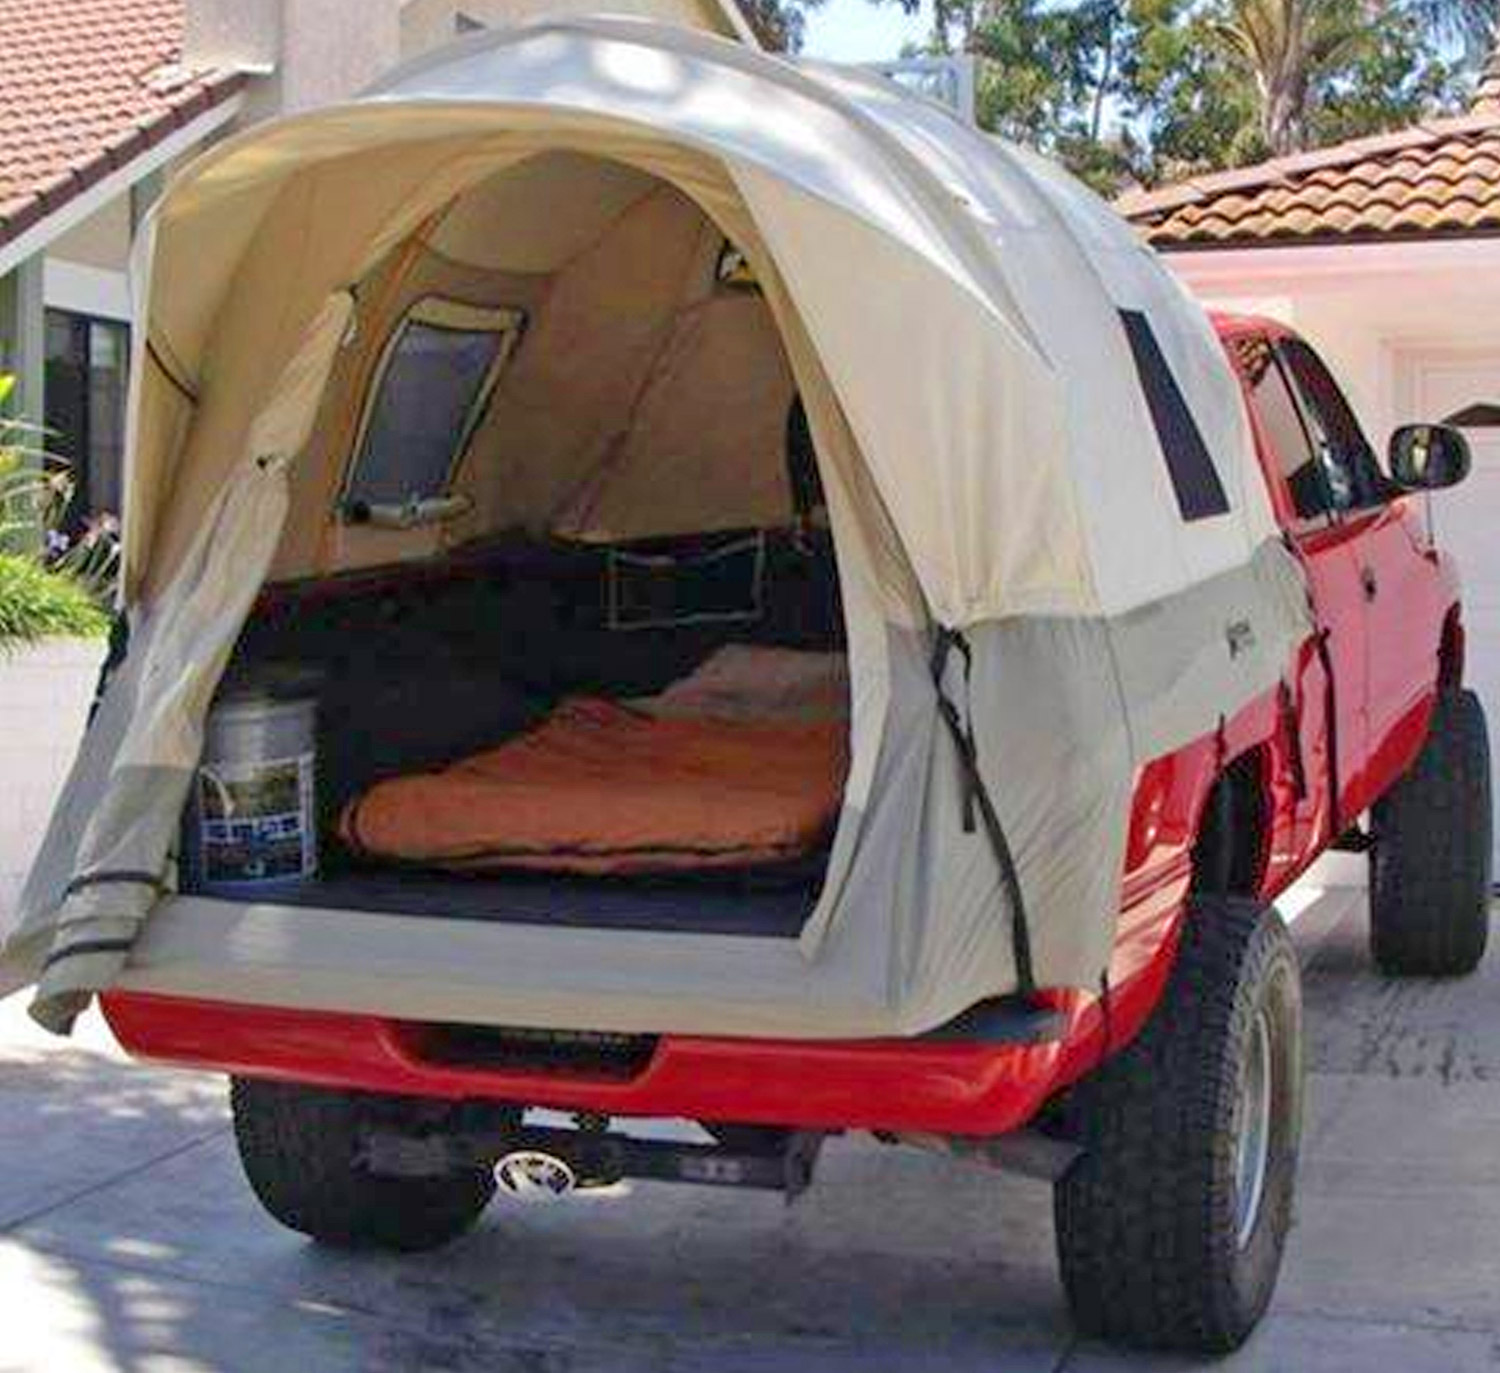 This Truck Bed Camping Tent Gives You A Place To Sleep Wherever You Are